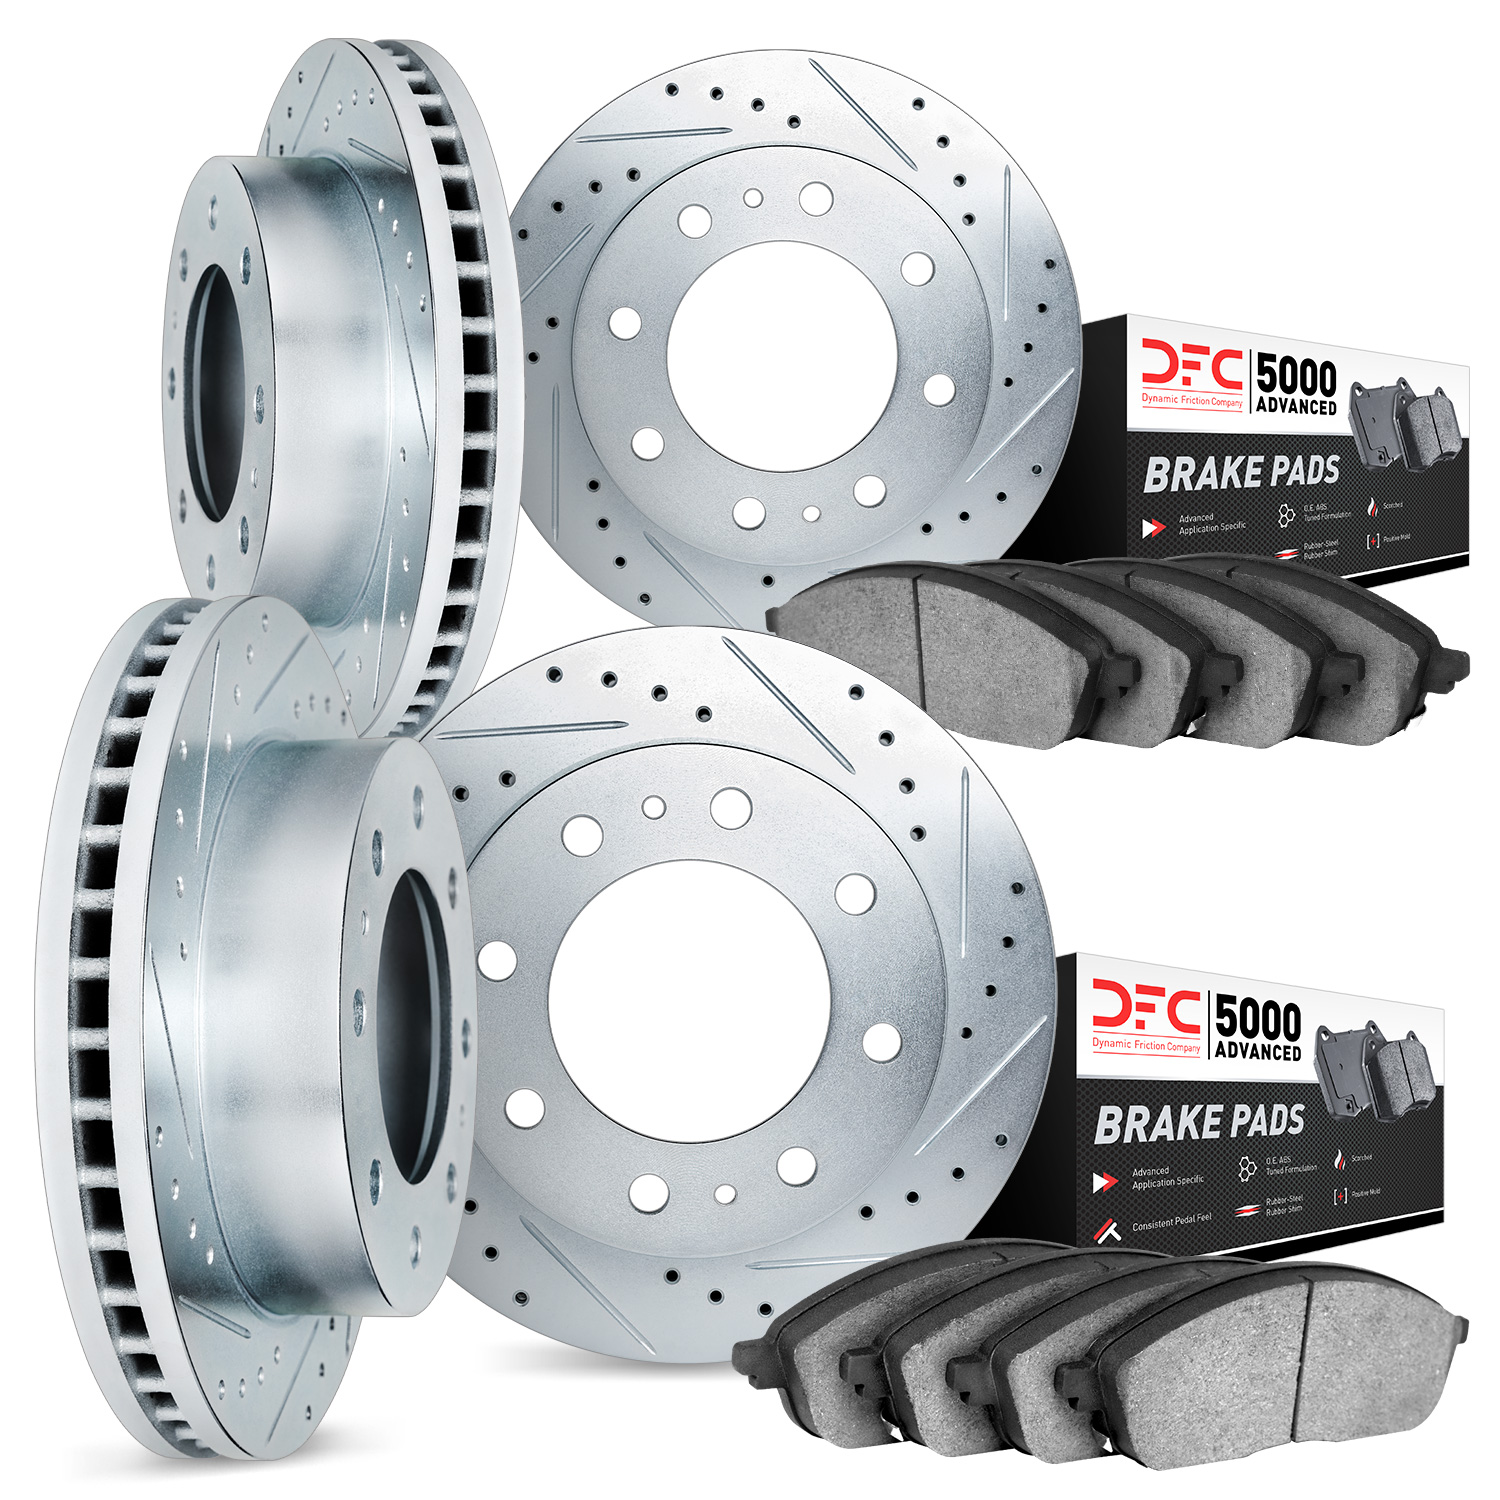 7504-54368 Drilled/Slotted Brake Rotors w/5000 Advanced Brake Pads Kit [Silver], 2006-2010 Ford/Lincoln/Mercury/Mazda, Position: